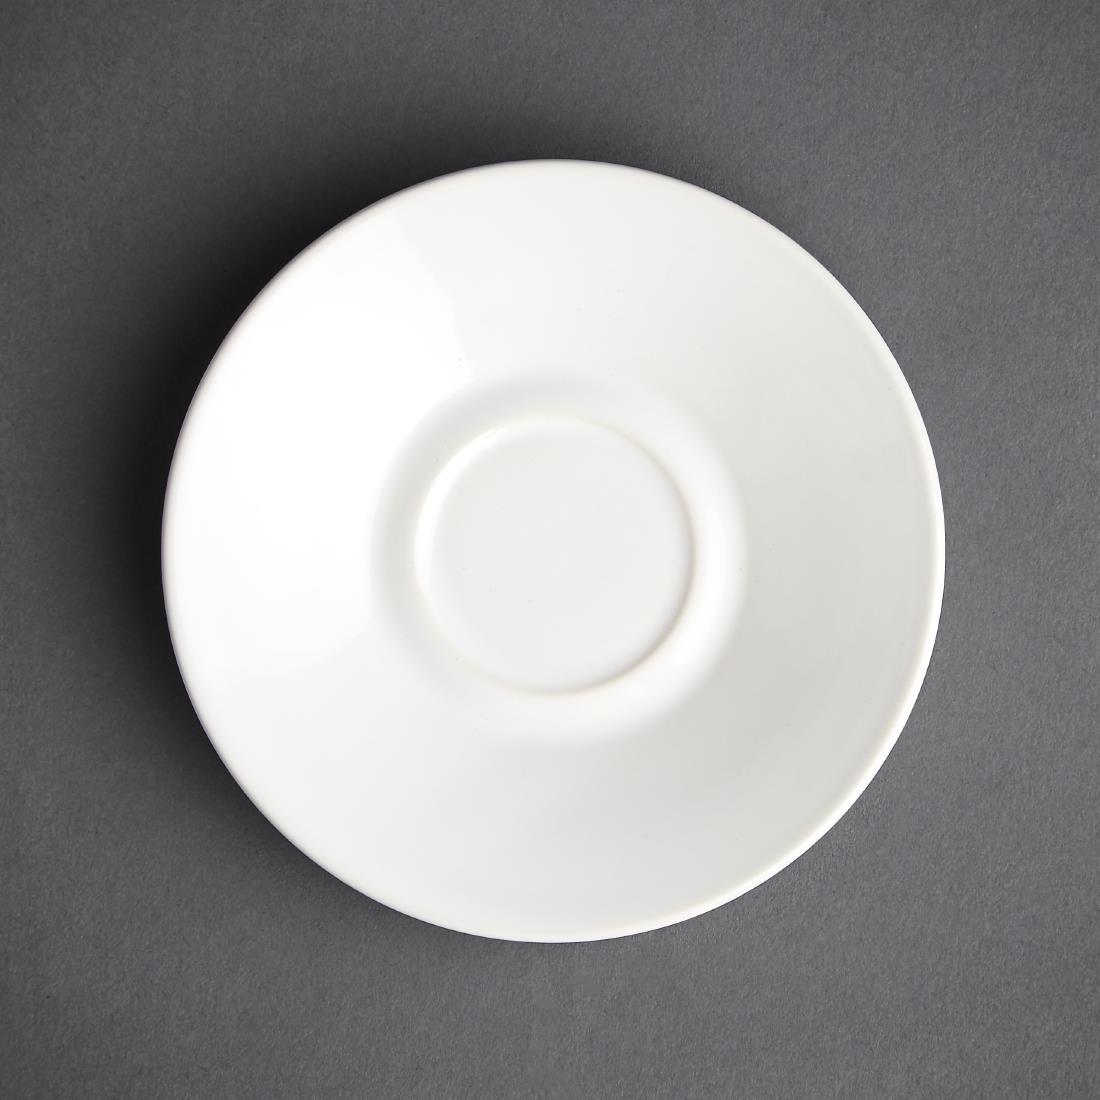 Olympia Cafe Espresso Saucers White 116.5mm (Pack of 12) - GK086  - 1